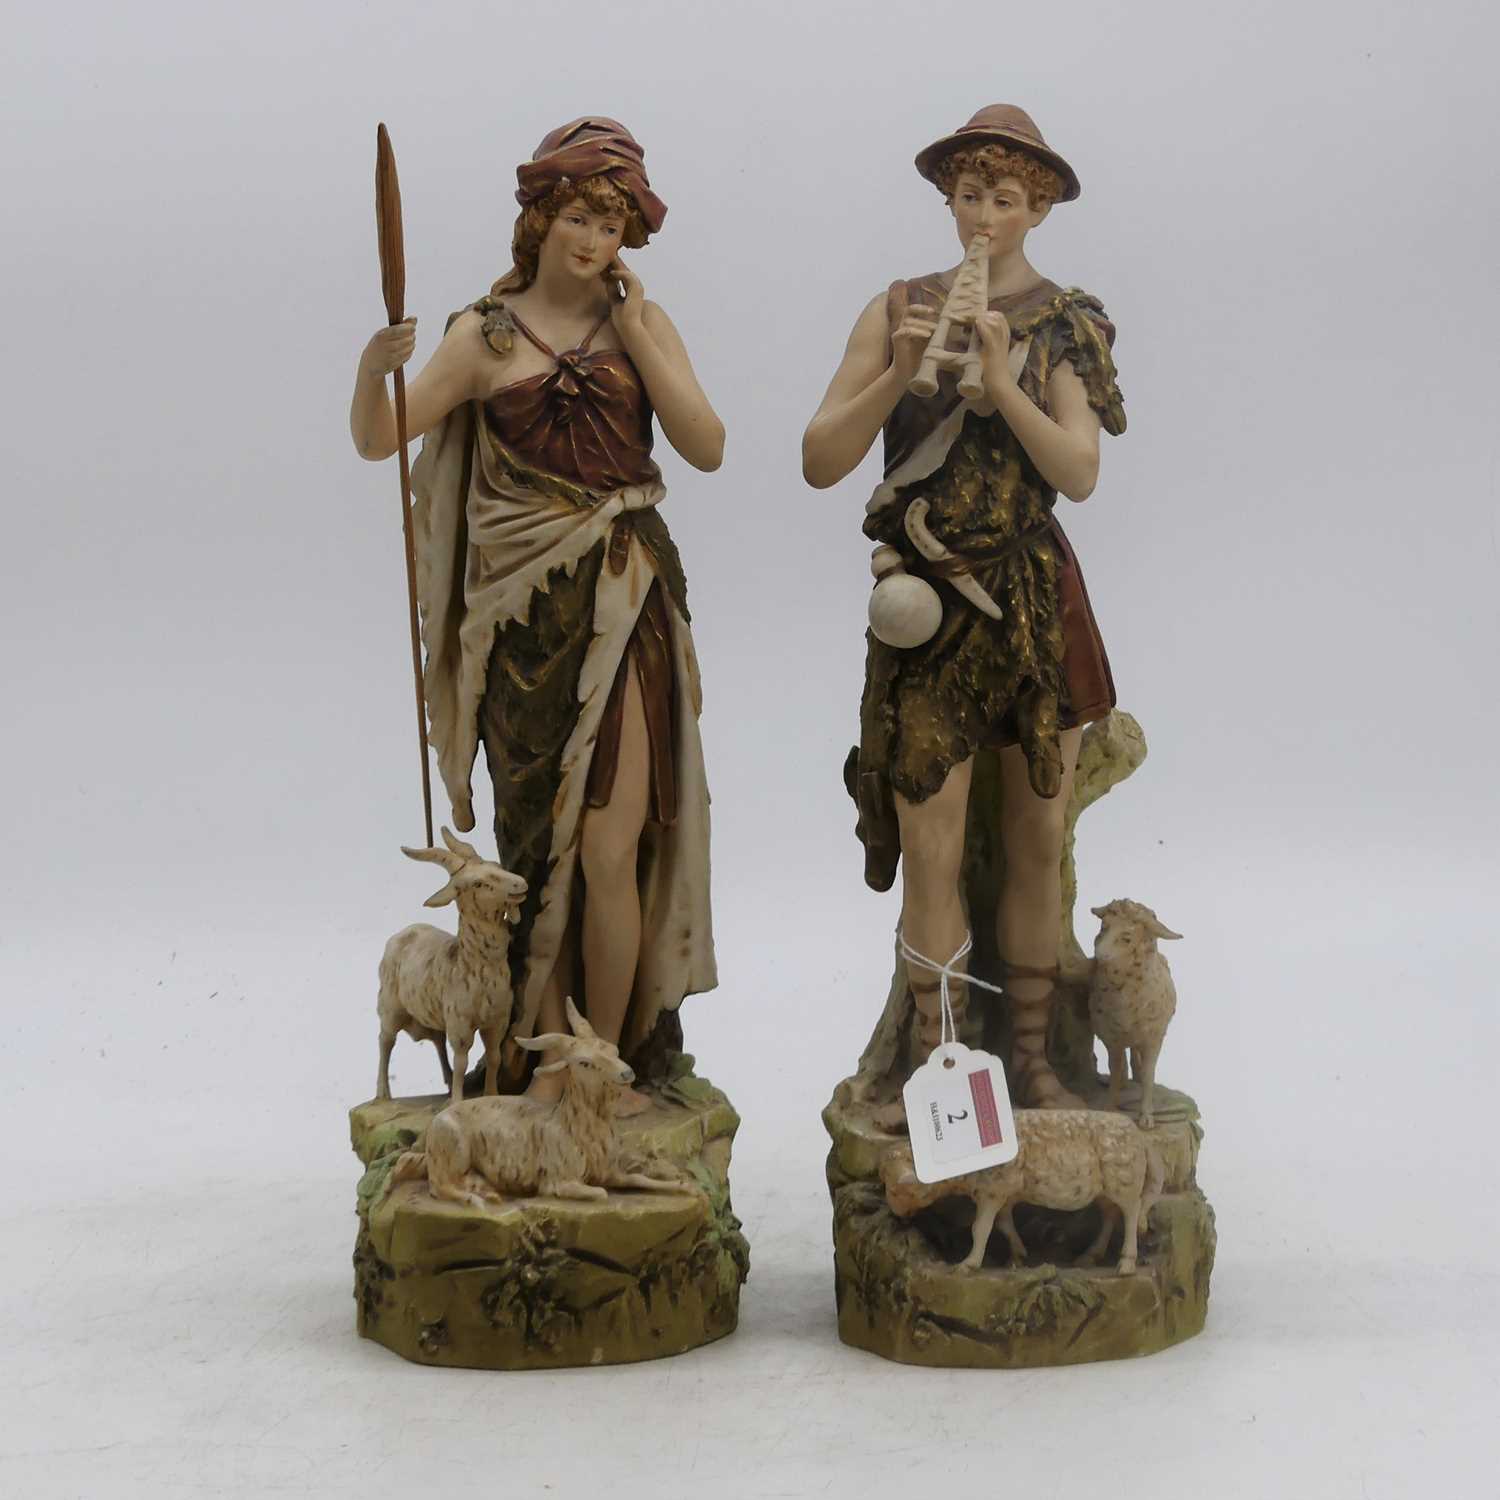 Lot 2 - A pair of Royal Dux figures, each shown in...